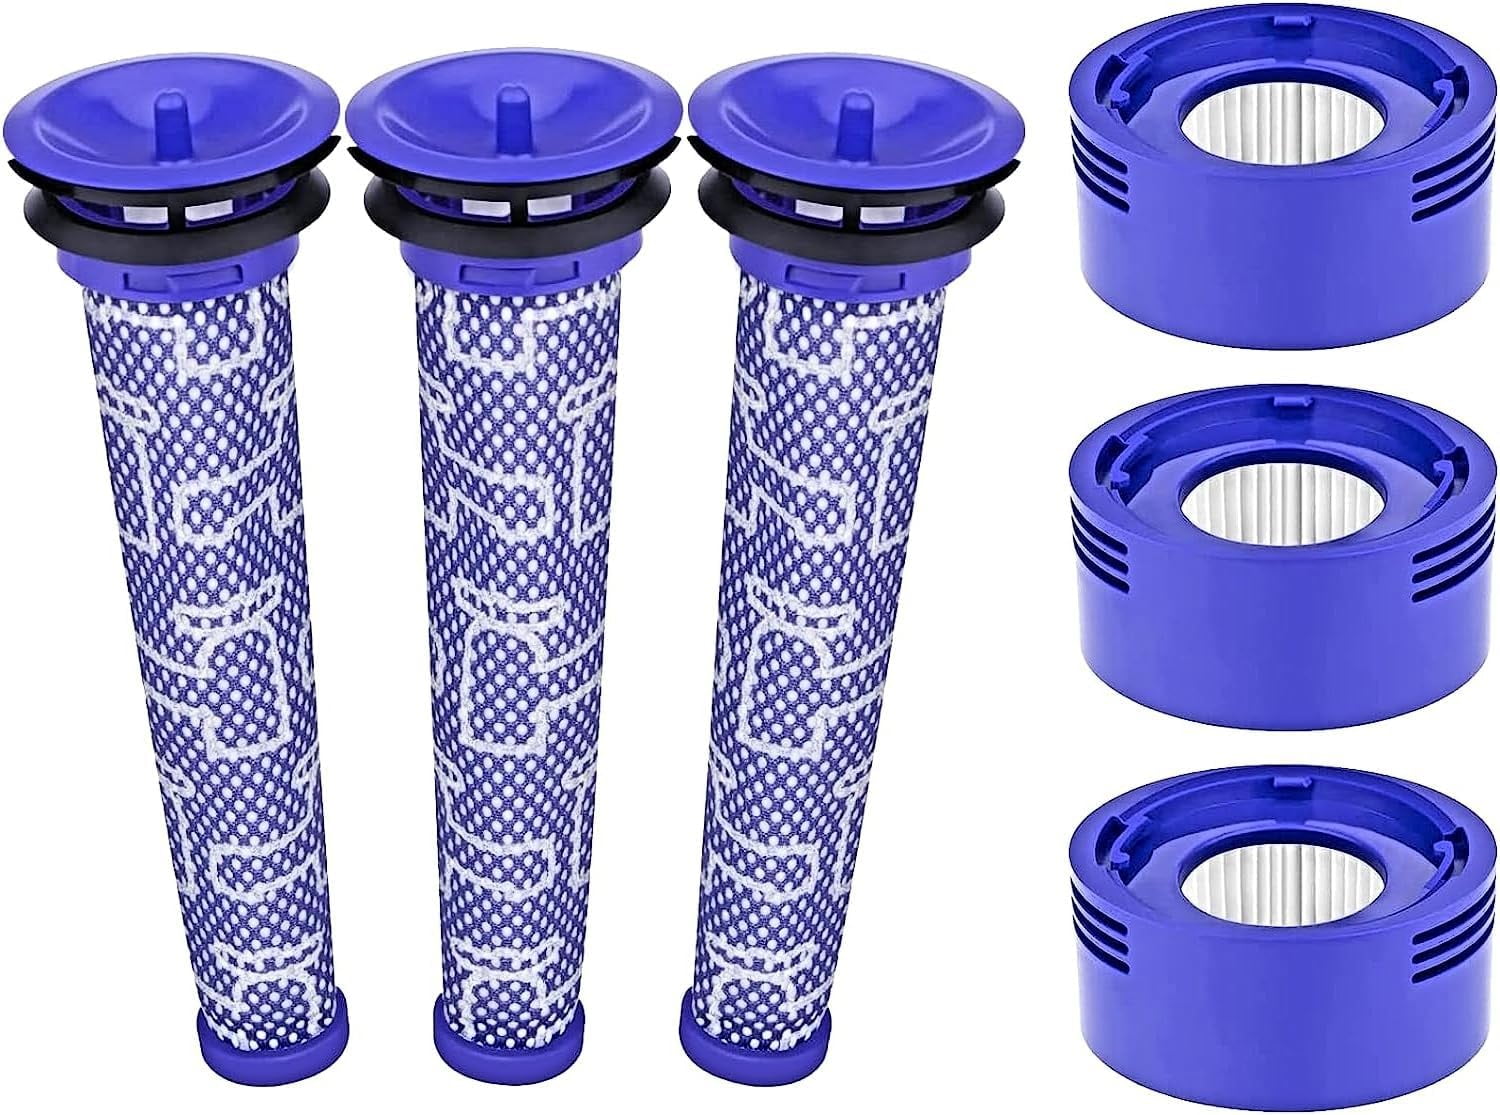 6 Pack Vacuum Filter Replacement Kit For Dyson V7, V8 Animal And